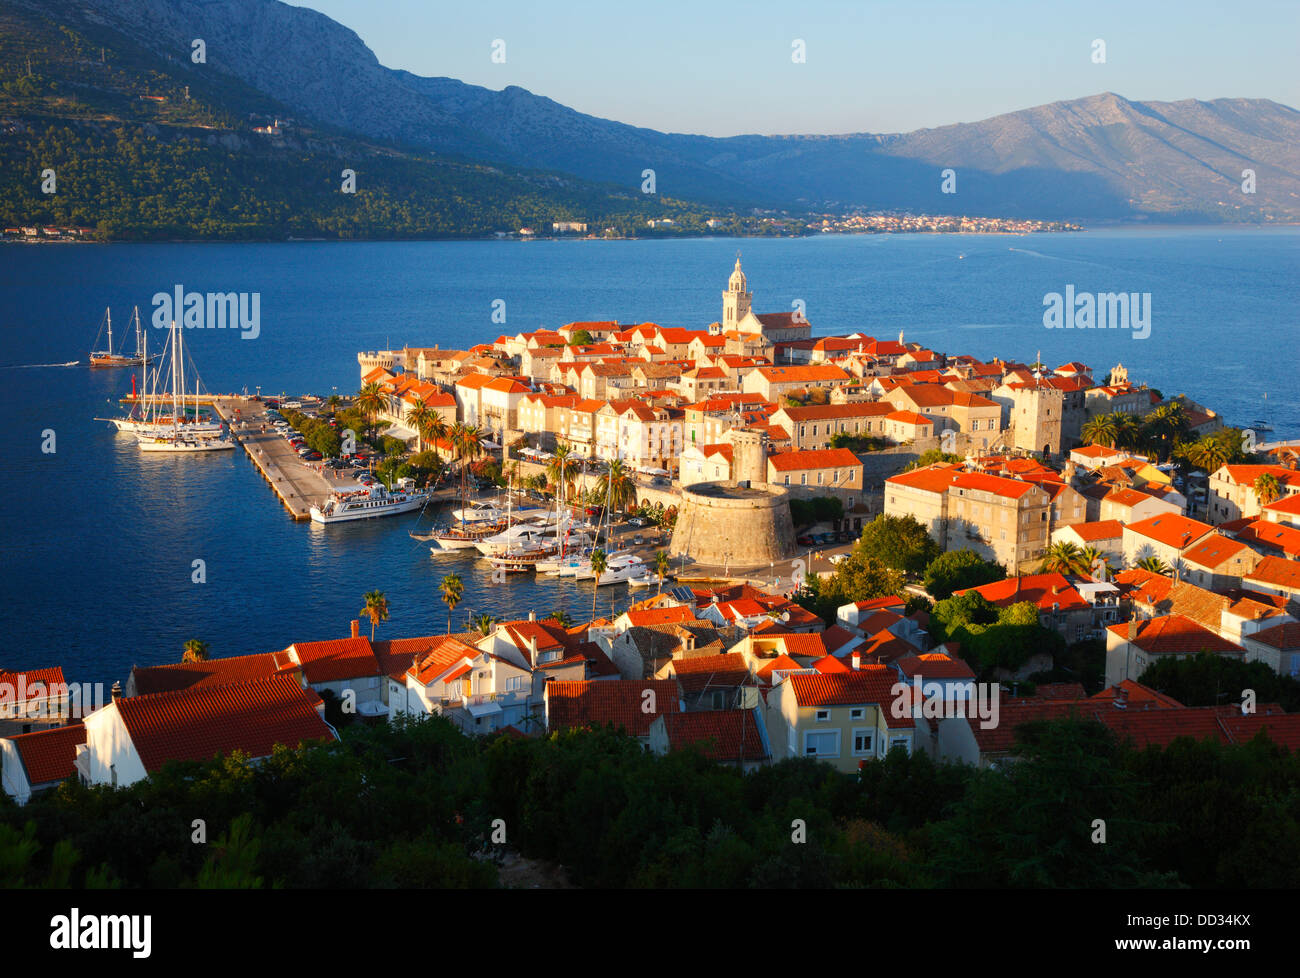 Korcula old town. Peninsula Peljesac in the background. Stock Photo